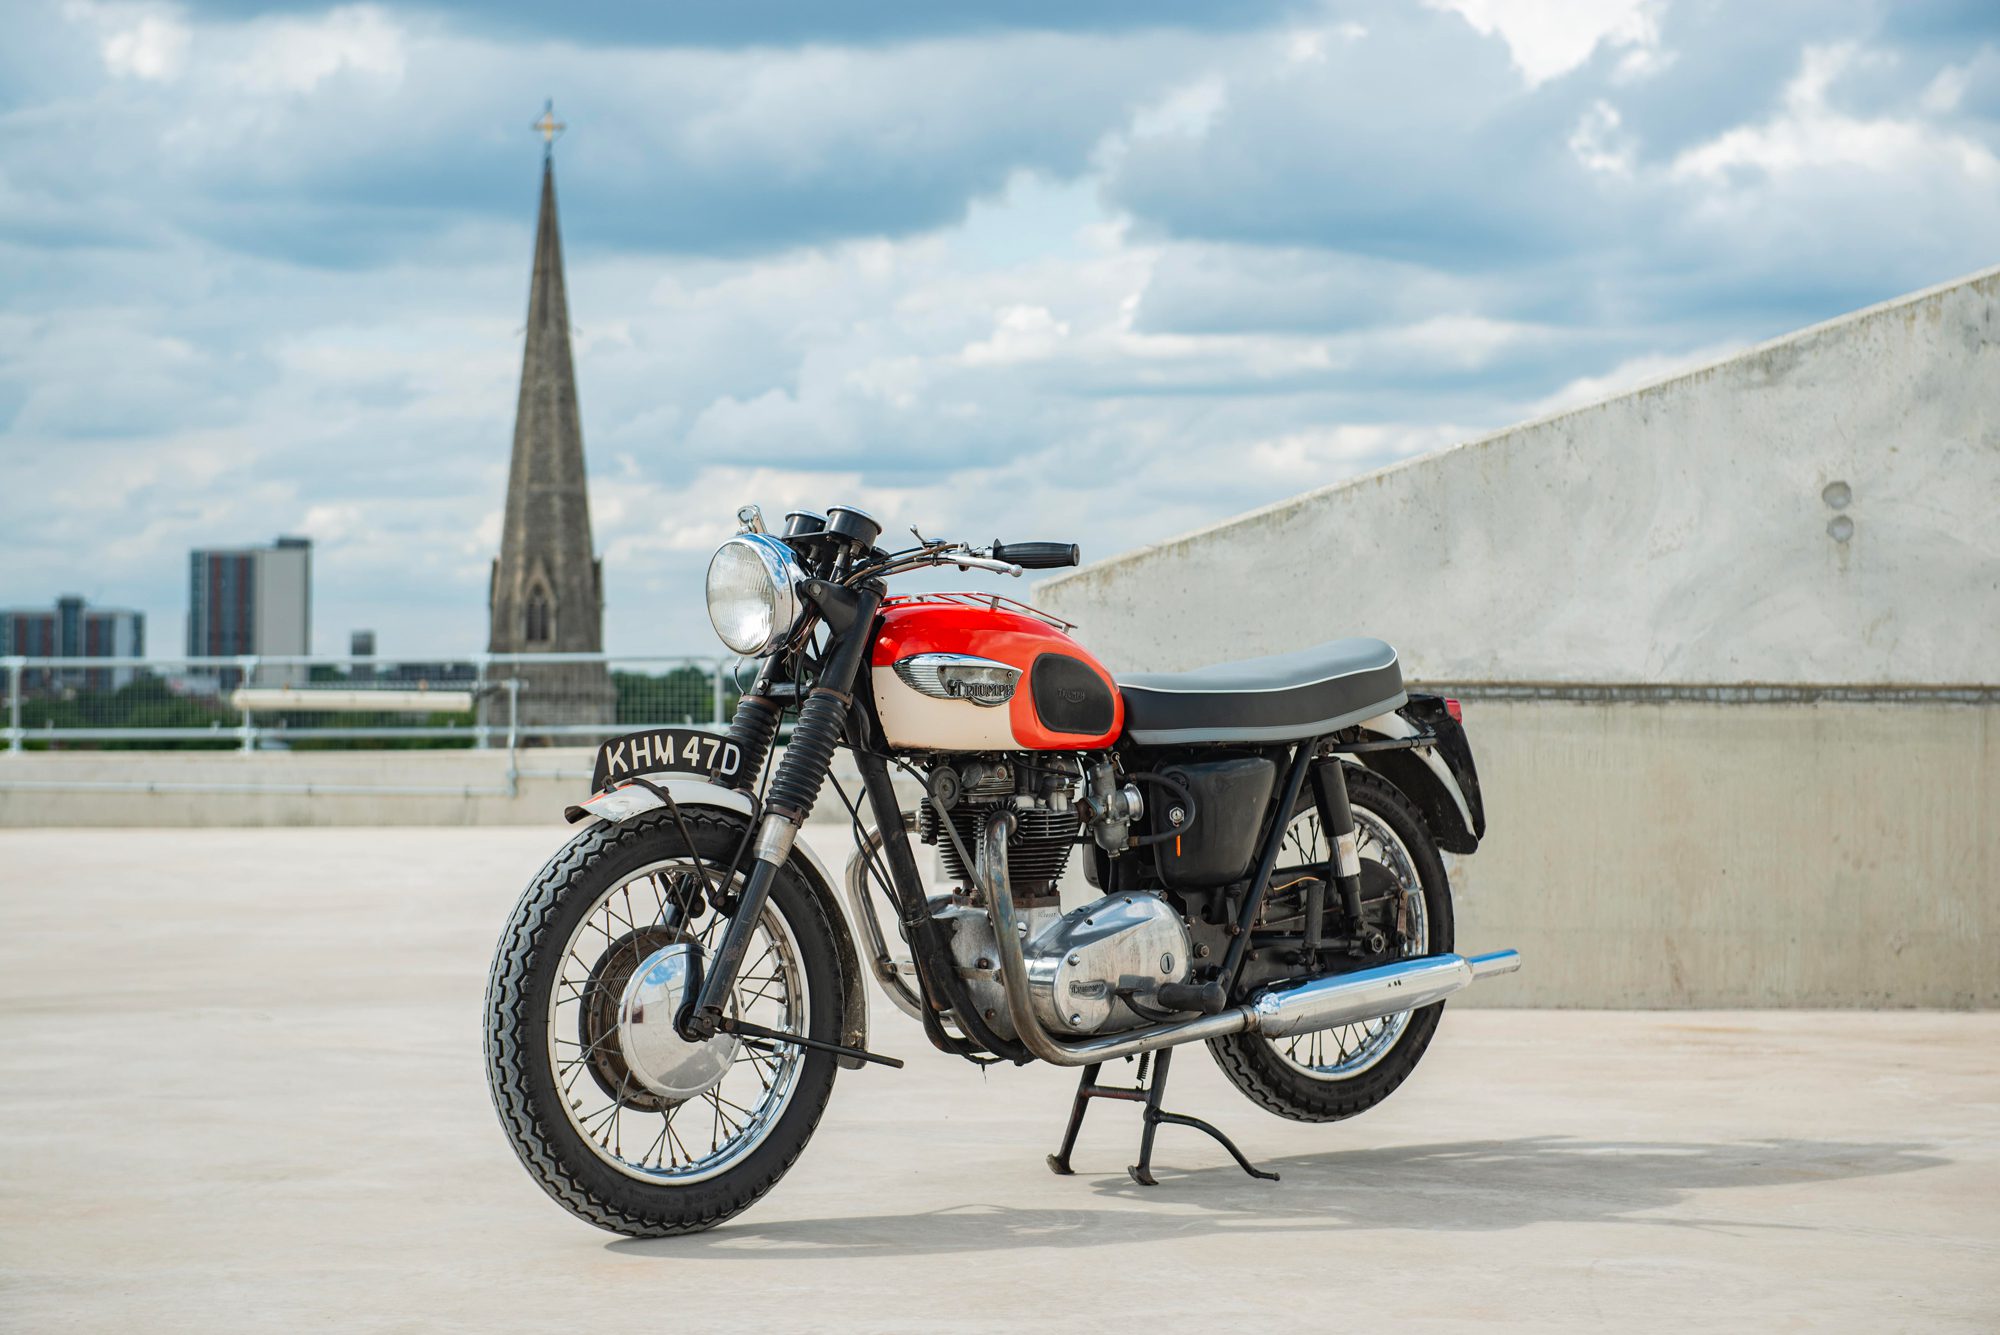 a 1966 Triumph Bonneville motorcycle in orange on a UK rooftop